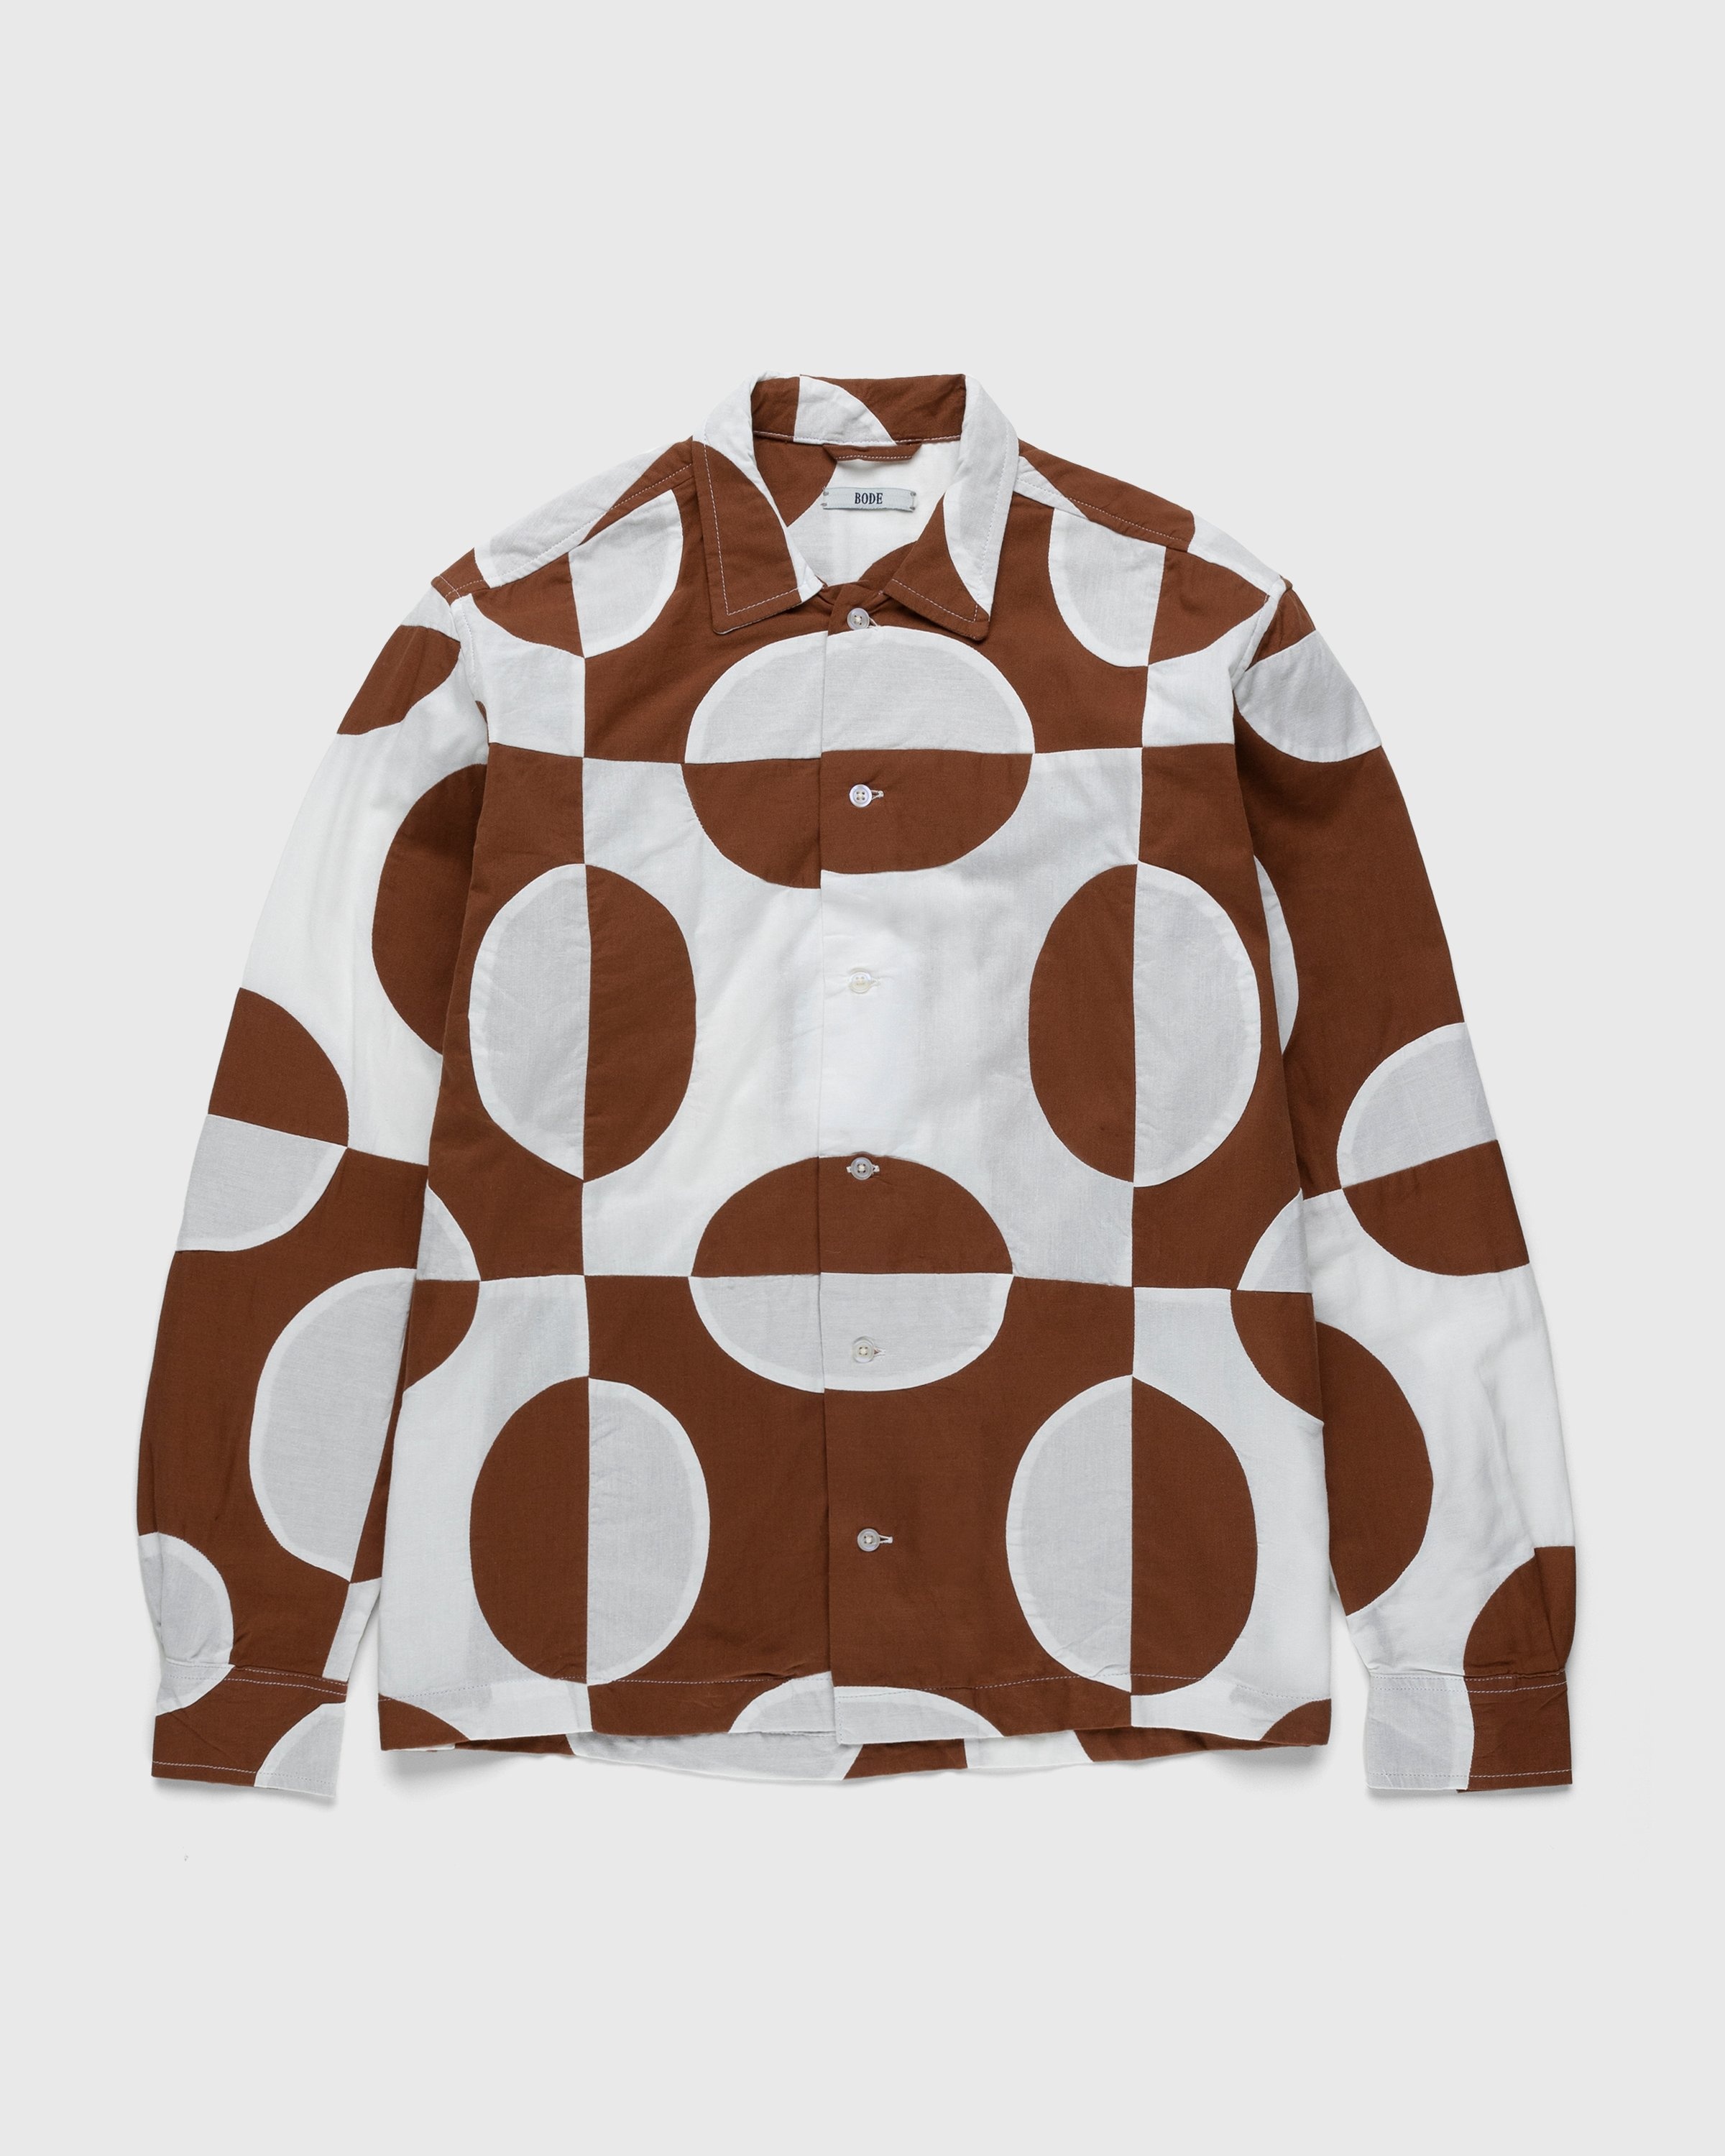 bode – Duo Oval Patchwork Long-Sleeve Shirt Brown - Shirts - Multi - Image 1